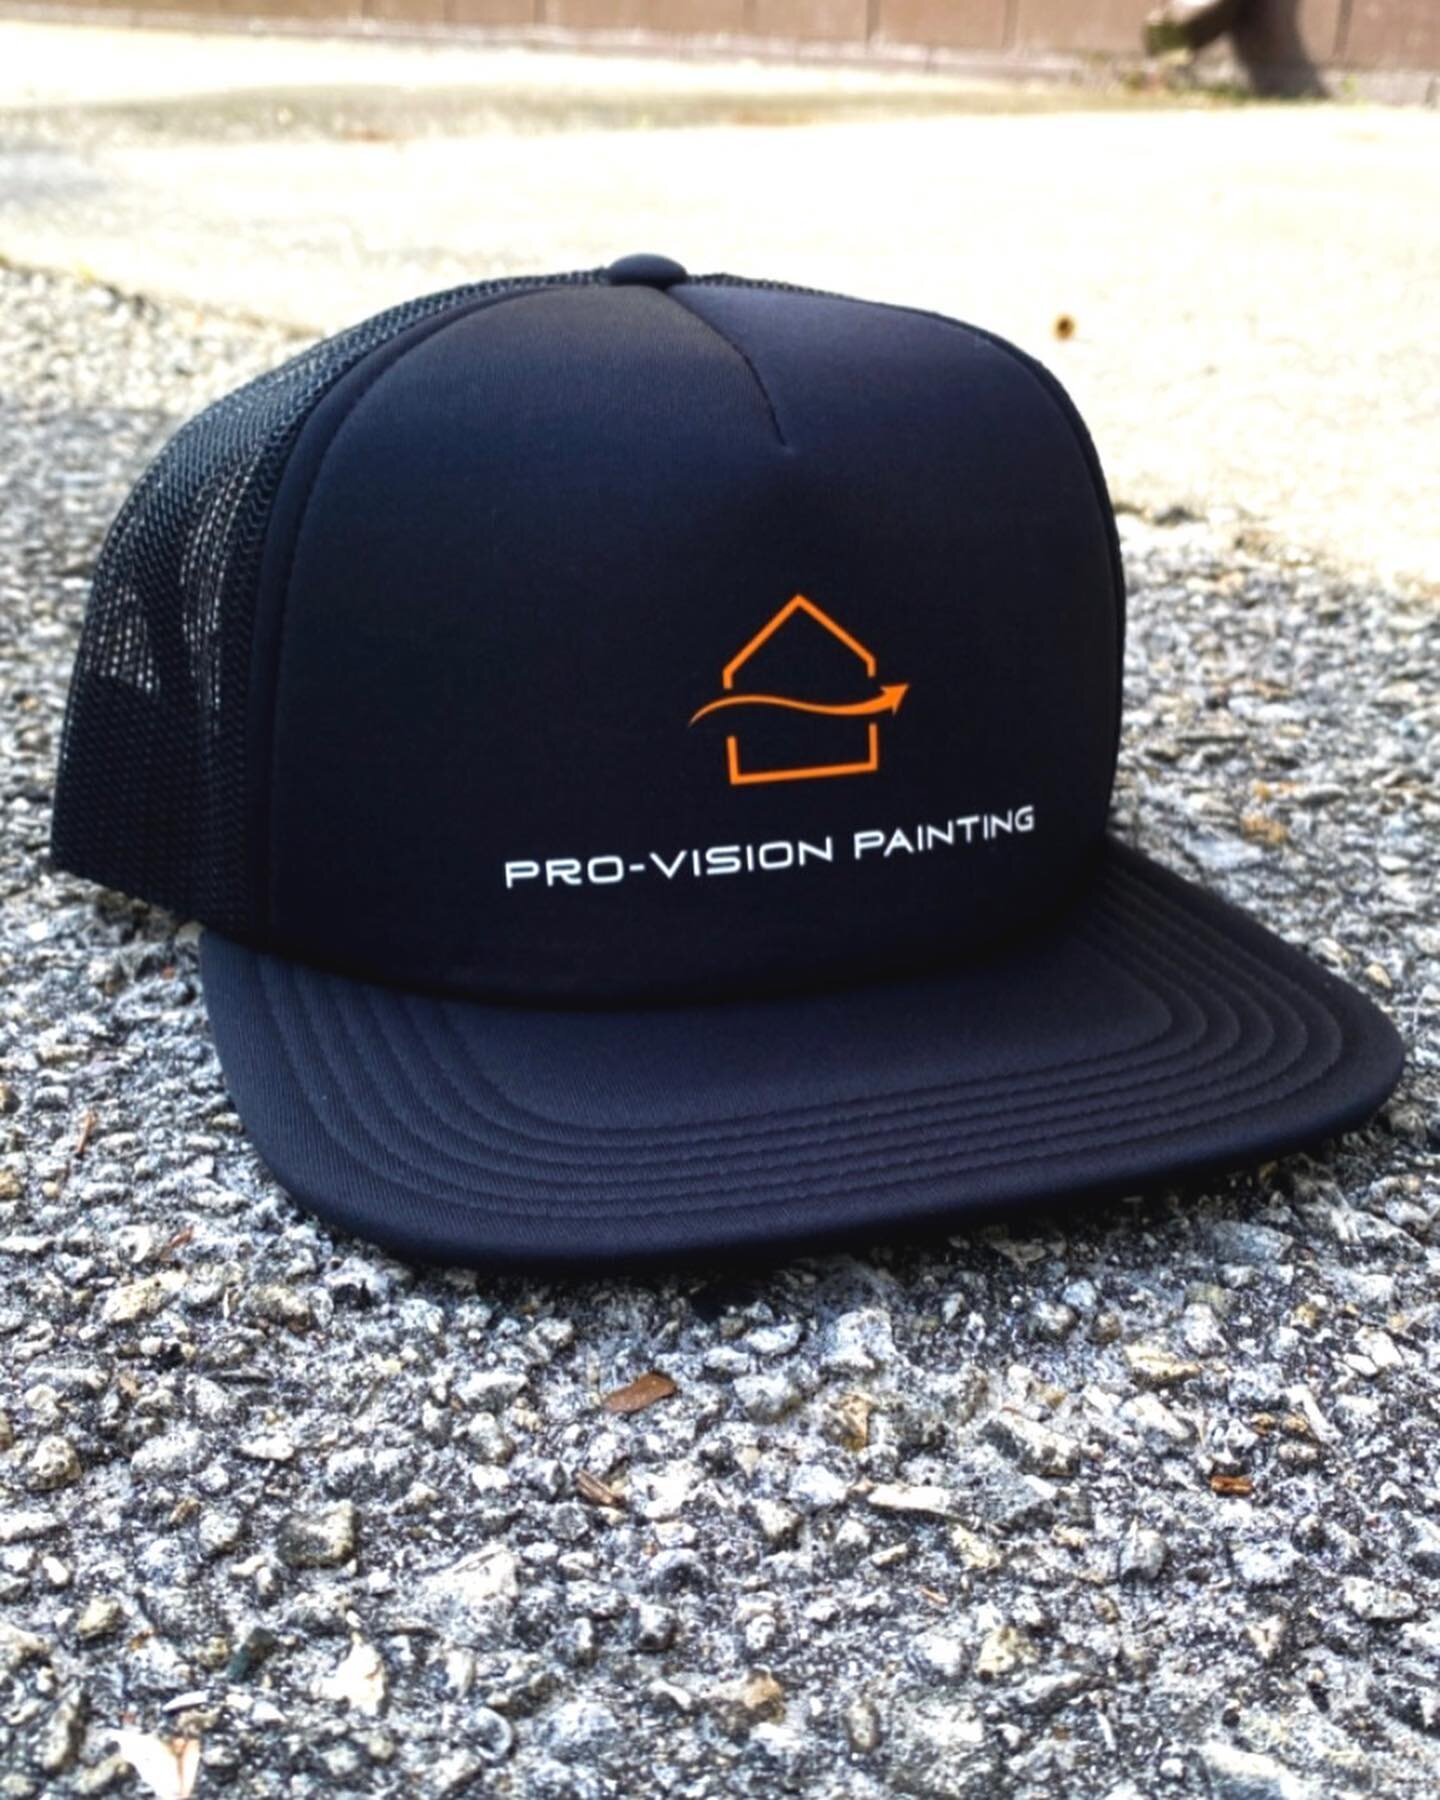 Some hats and tee&rsquo;s for @provision_paints 👨&zwj;🎨